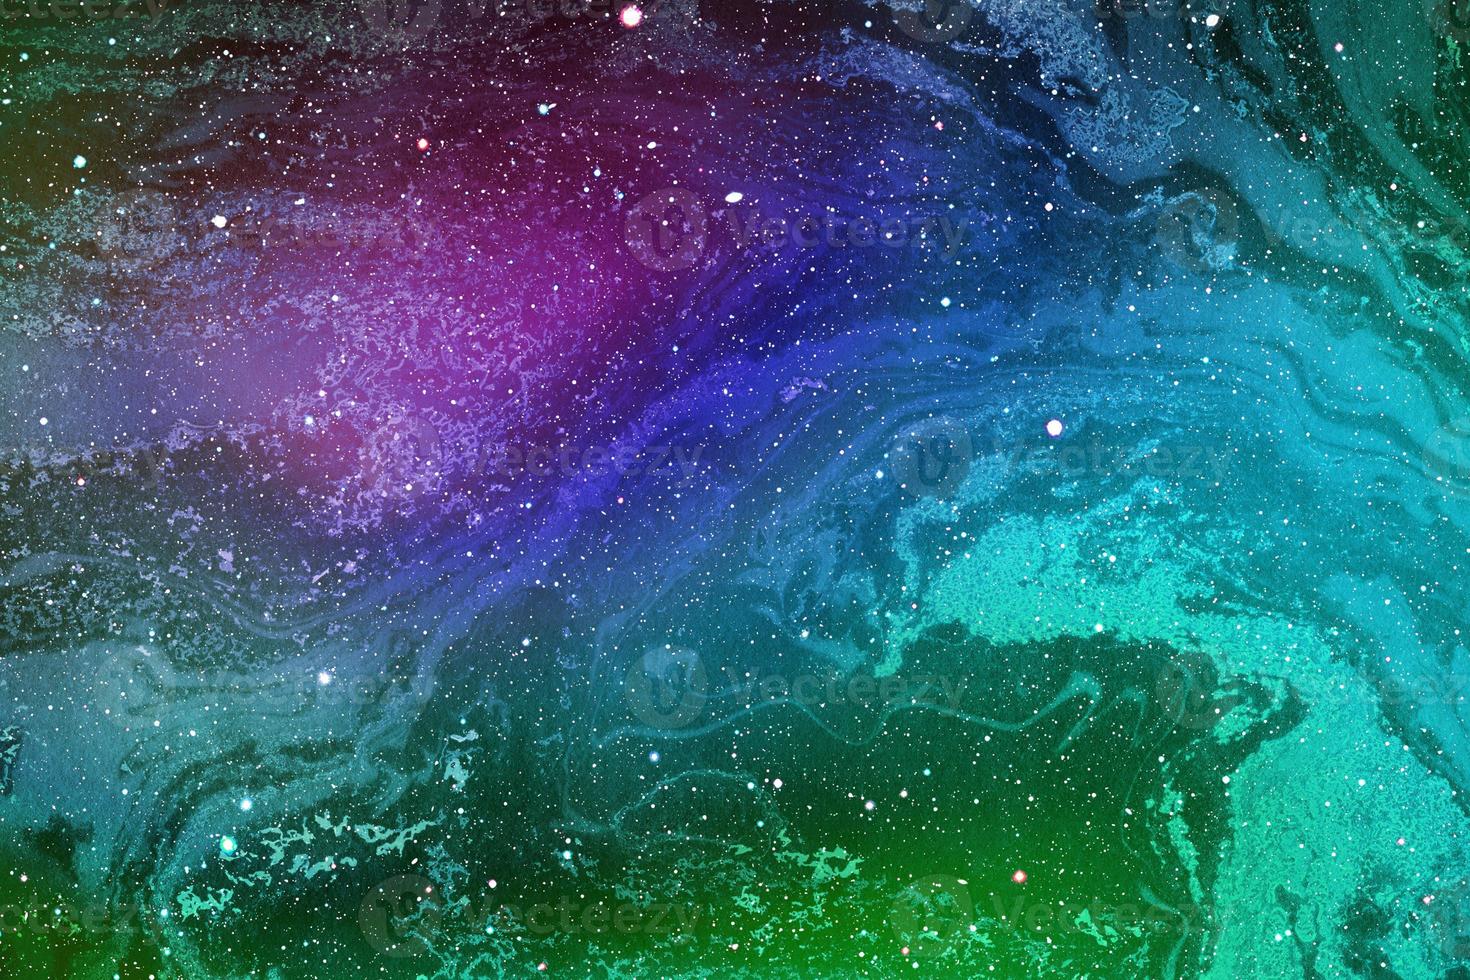 background of abstract galaxies with stars and planets with colorful sky motifs of universe night light space photo